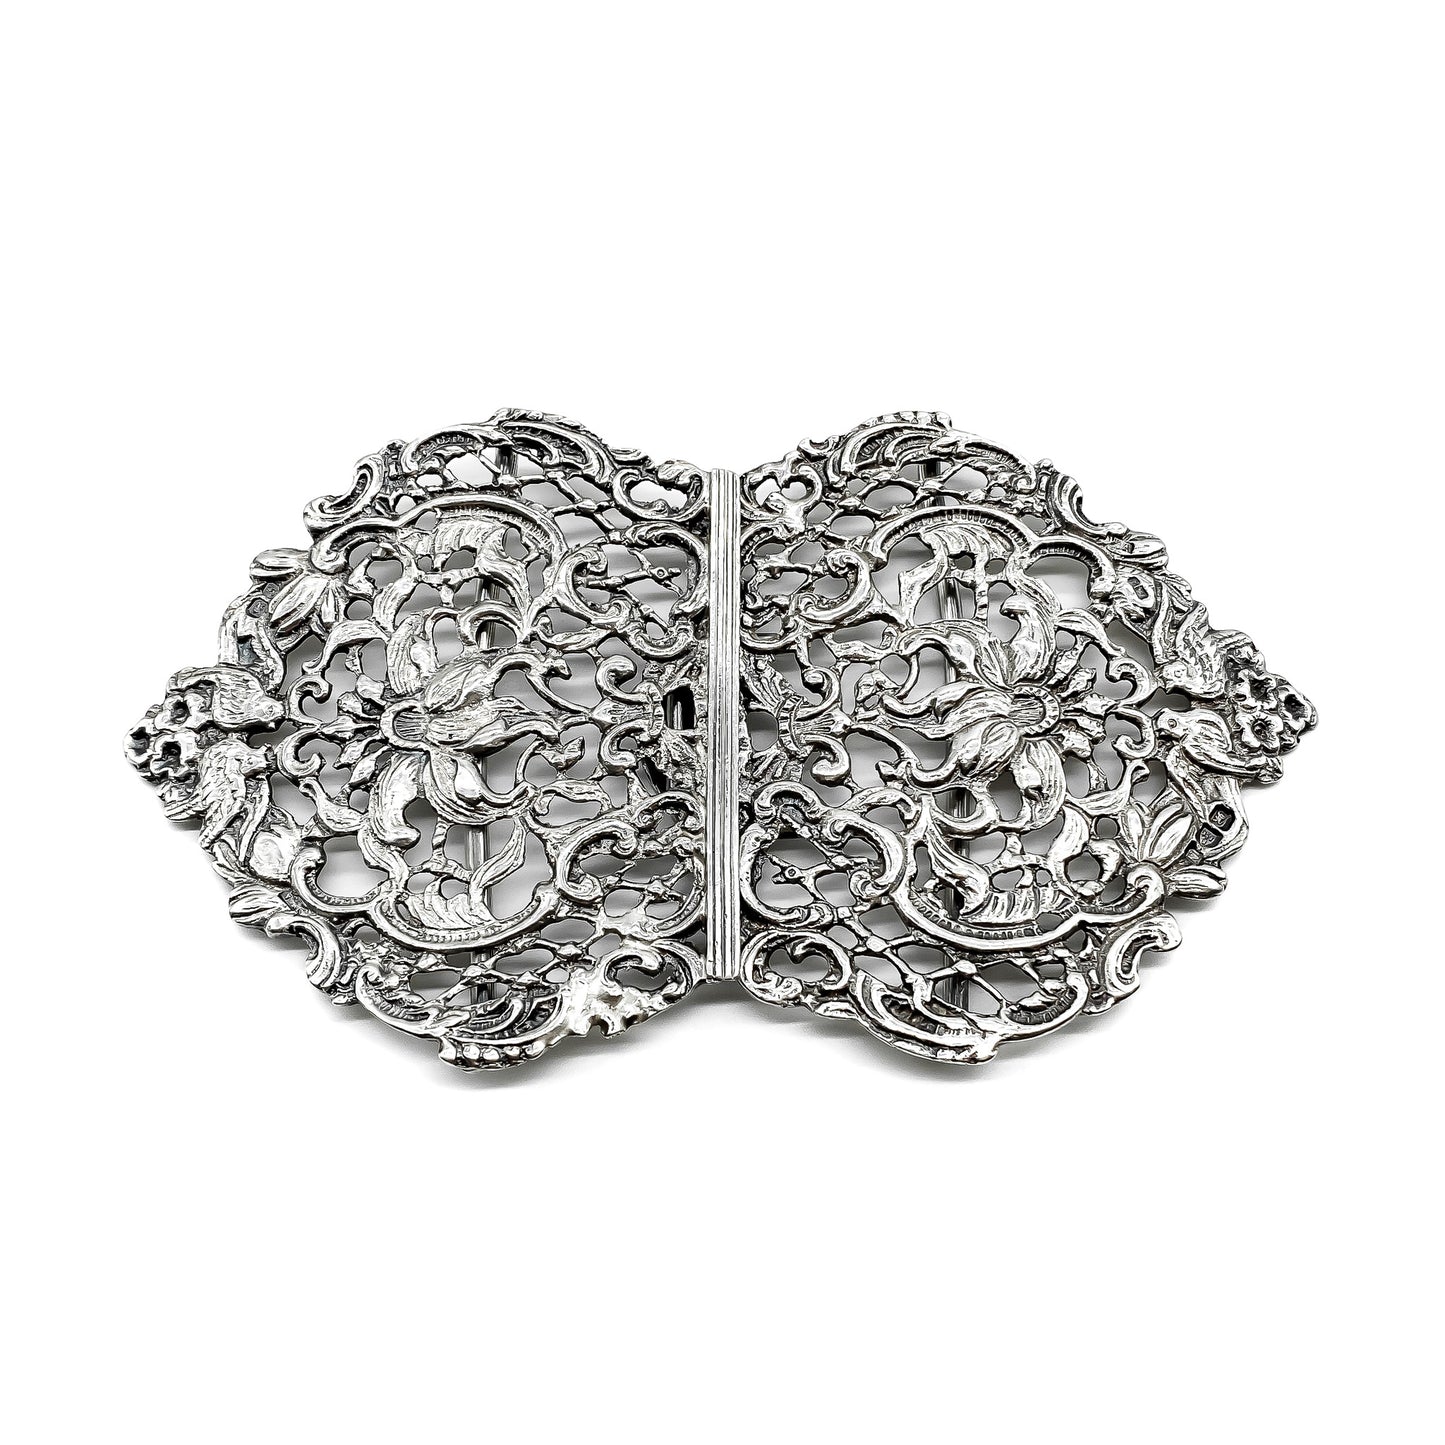 Very ornate Victorian sterling silver belt buckle with lovely floral design.